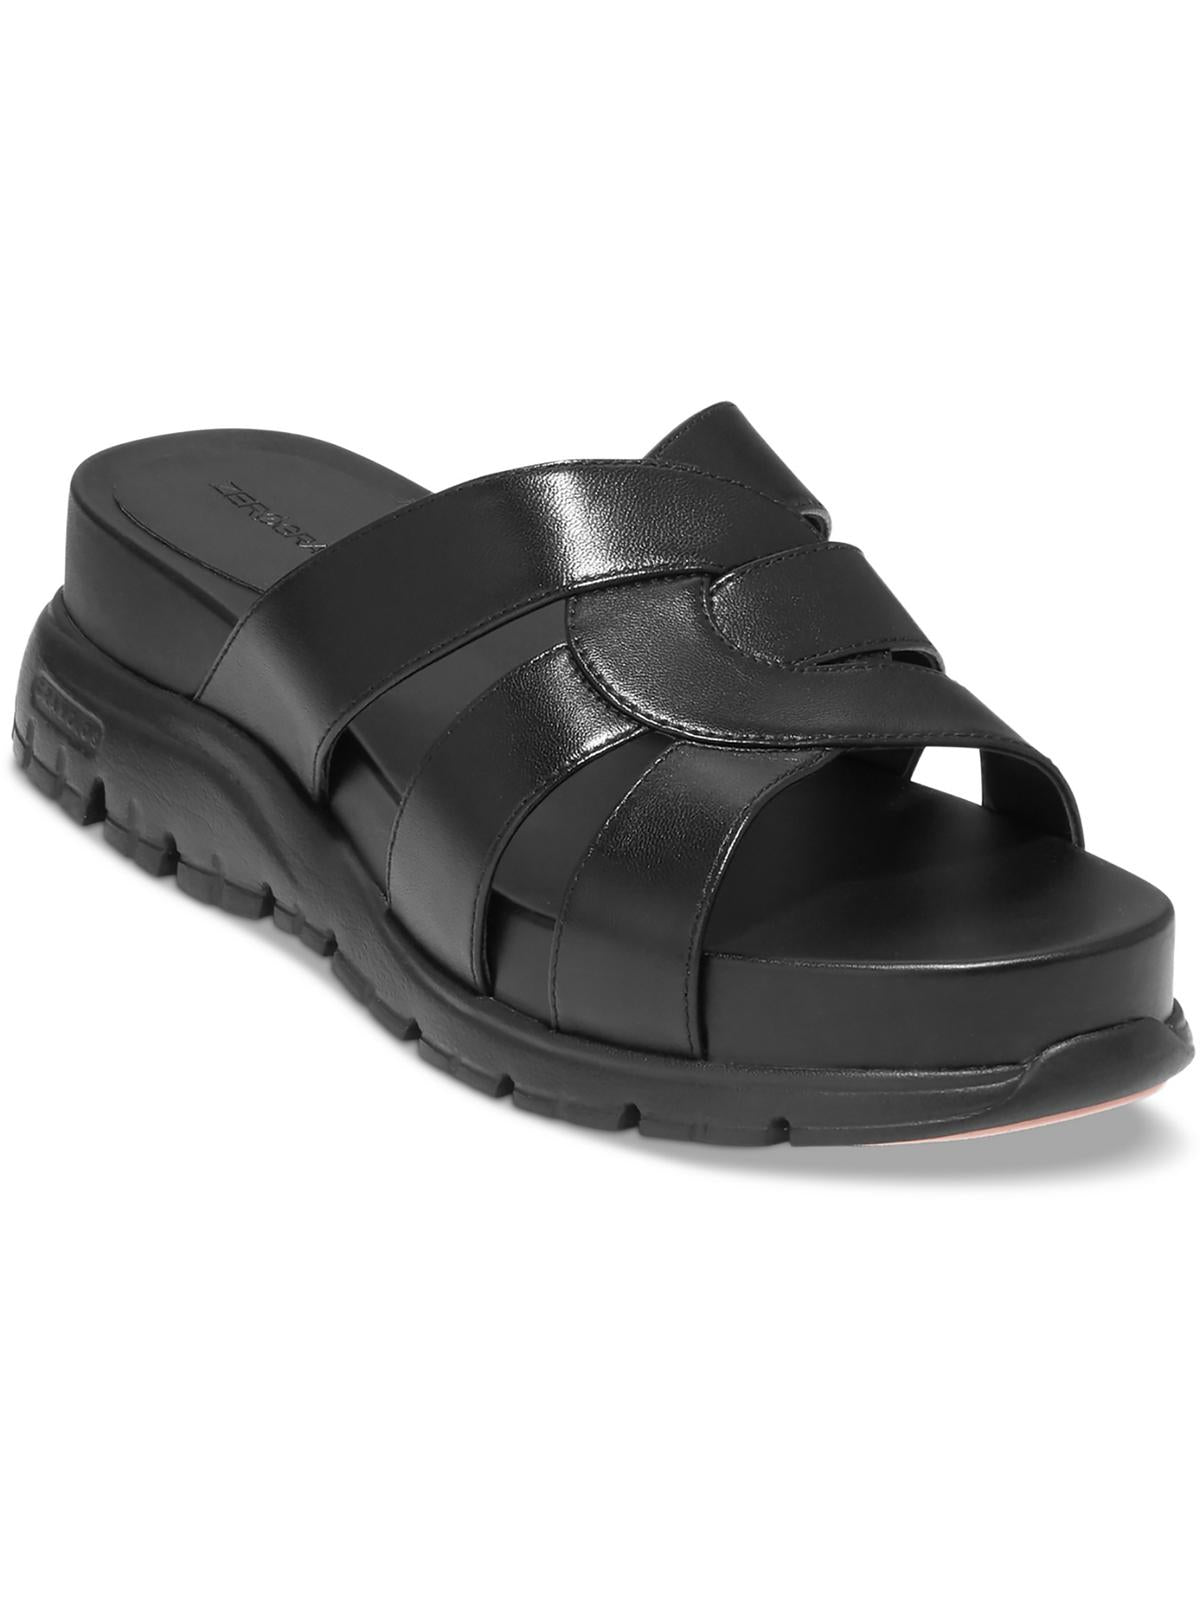 Shop Cole Haan Zg Slotted Womens Leather Wedge Slide Sandals In Black